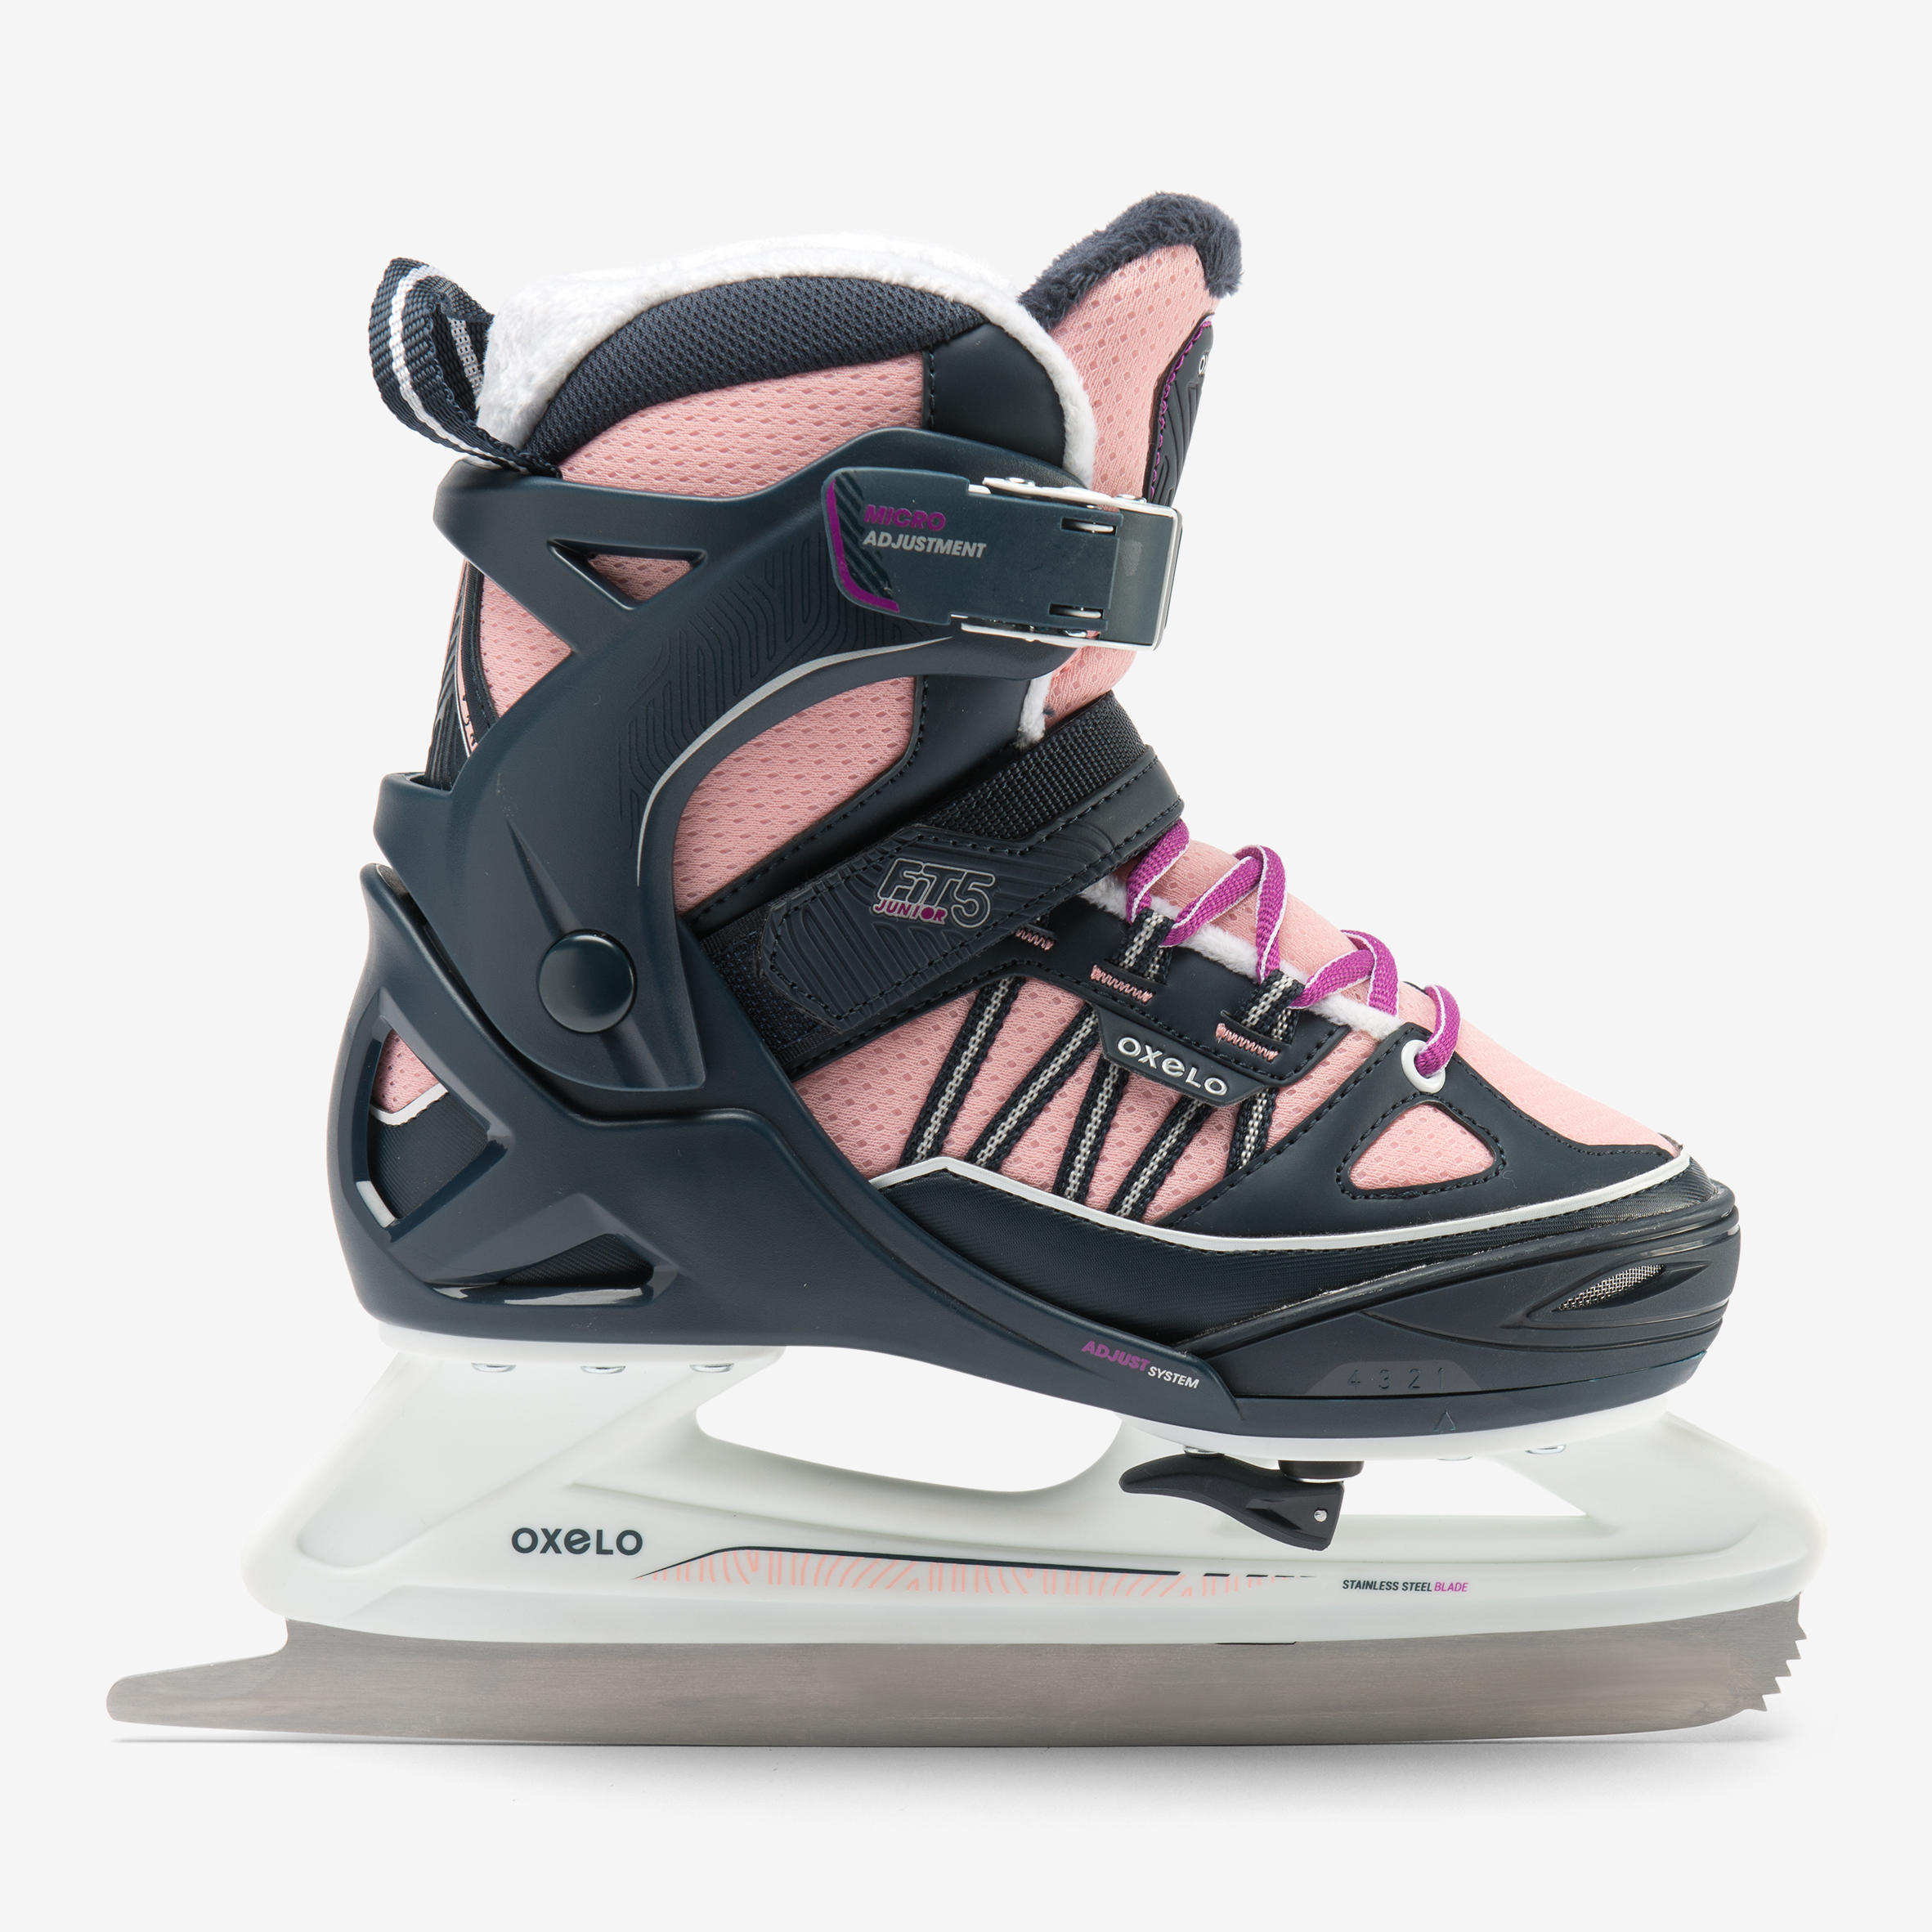 Kids' Ice Skates - FIT 500 Blue/Pink - OXELO